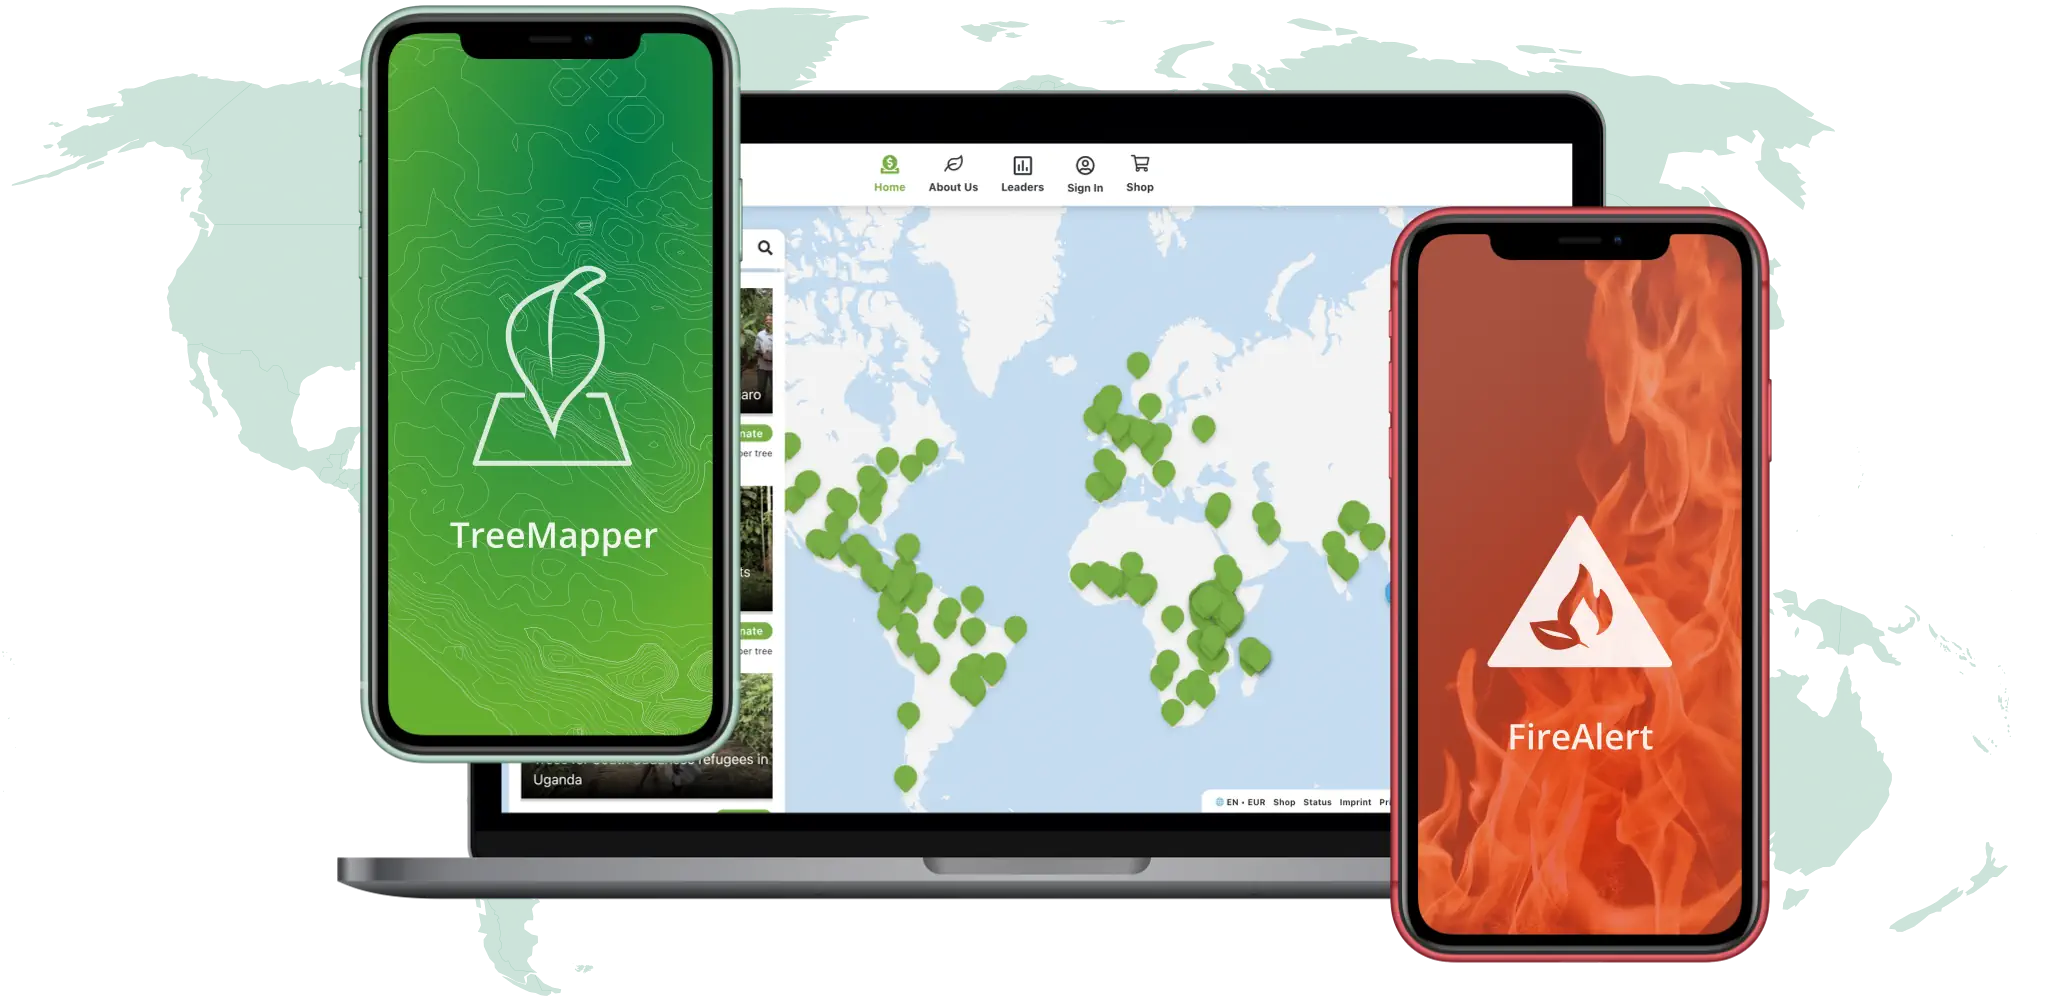 TreeMapper, fire alarm and the the platform opened on multiple devices in front of a world map